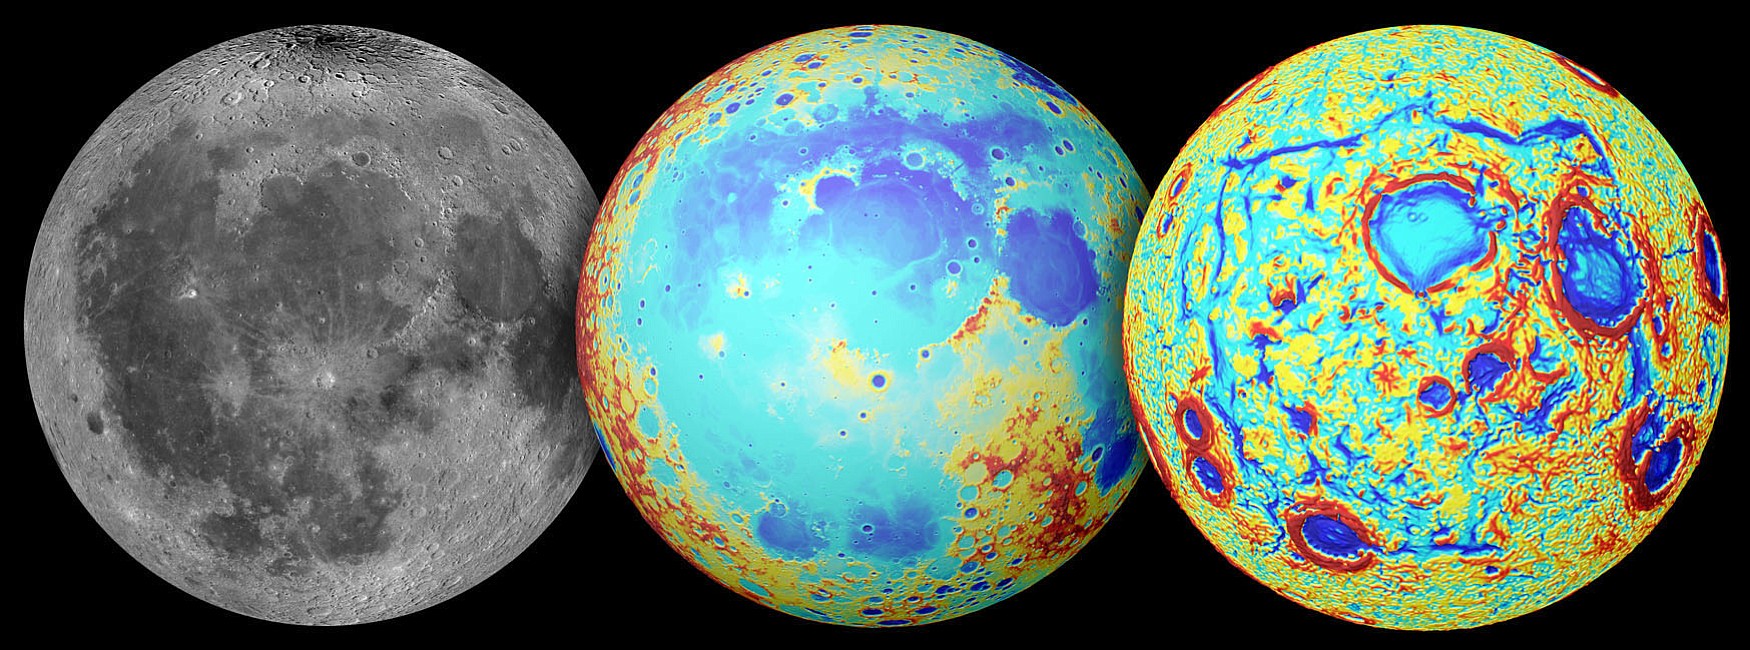 NASA/Colorado School of Mines/MIT/JPL/Goddard Space Flight Center
The giant basin on the near side of the moon may have been formed by ancient magma flows rather than a massive asteroid. The moon as observed in visible light, from left, topography (where red is high and blue is low) and the GRAIL gravity gradients.